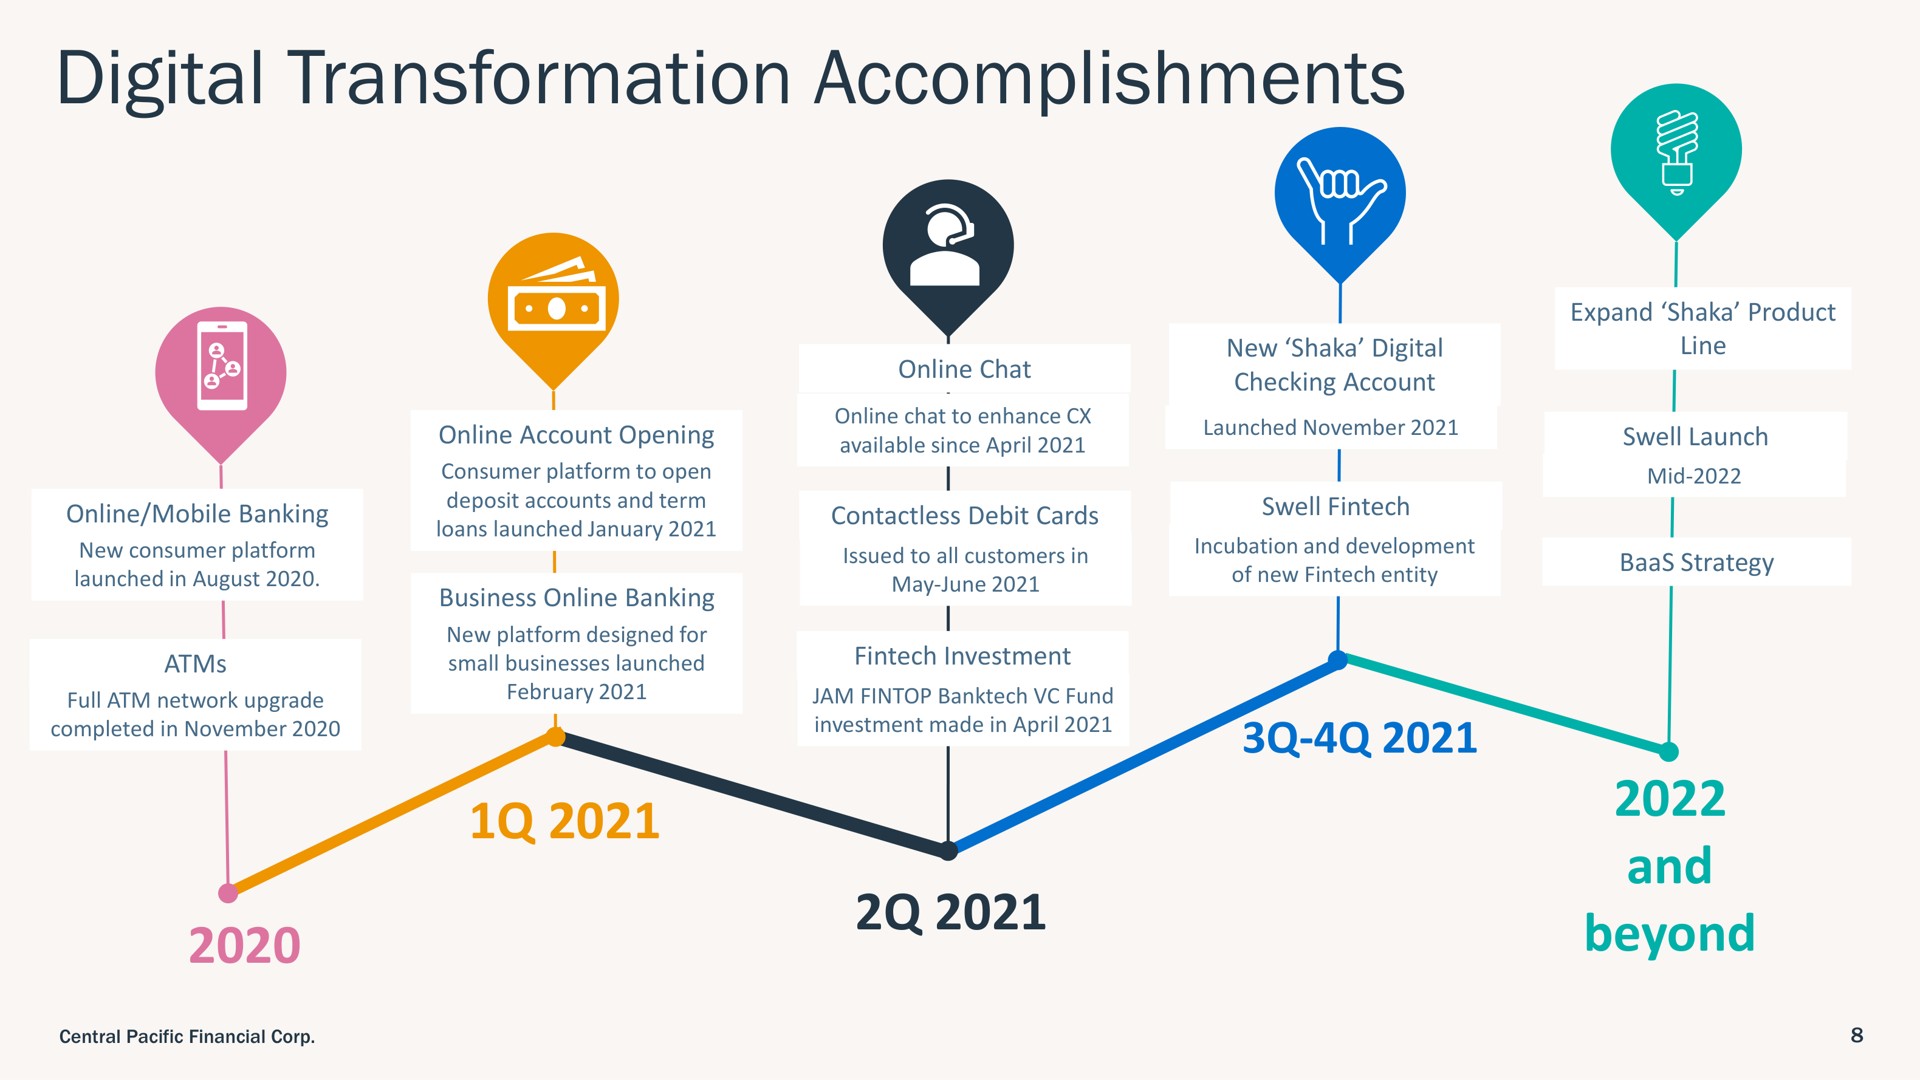 digital transformation accomplishments and beyond | Central Pacific Financial